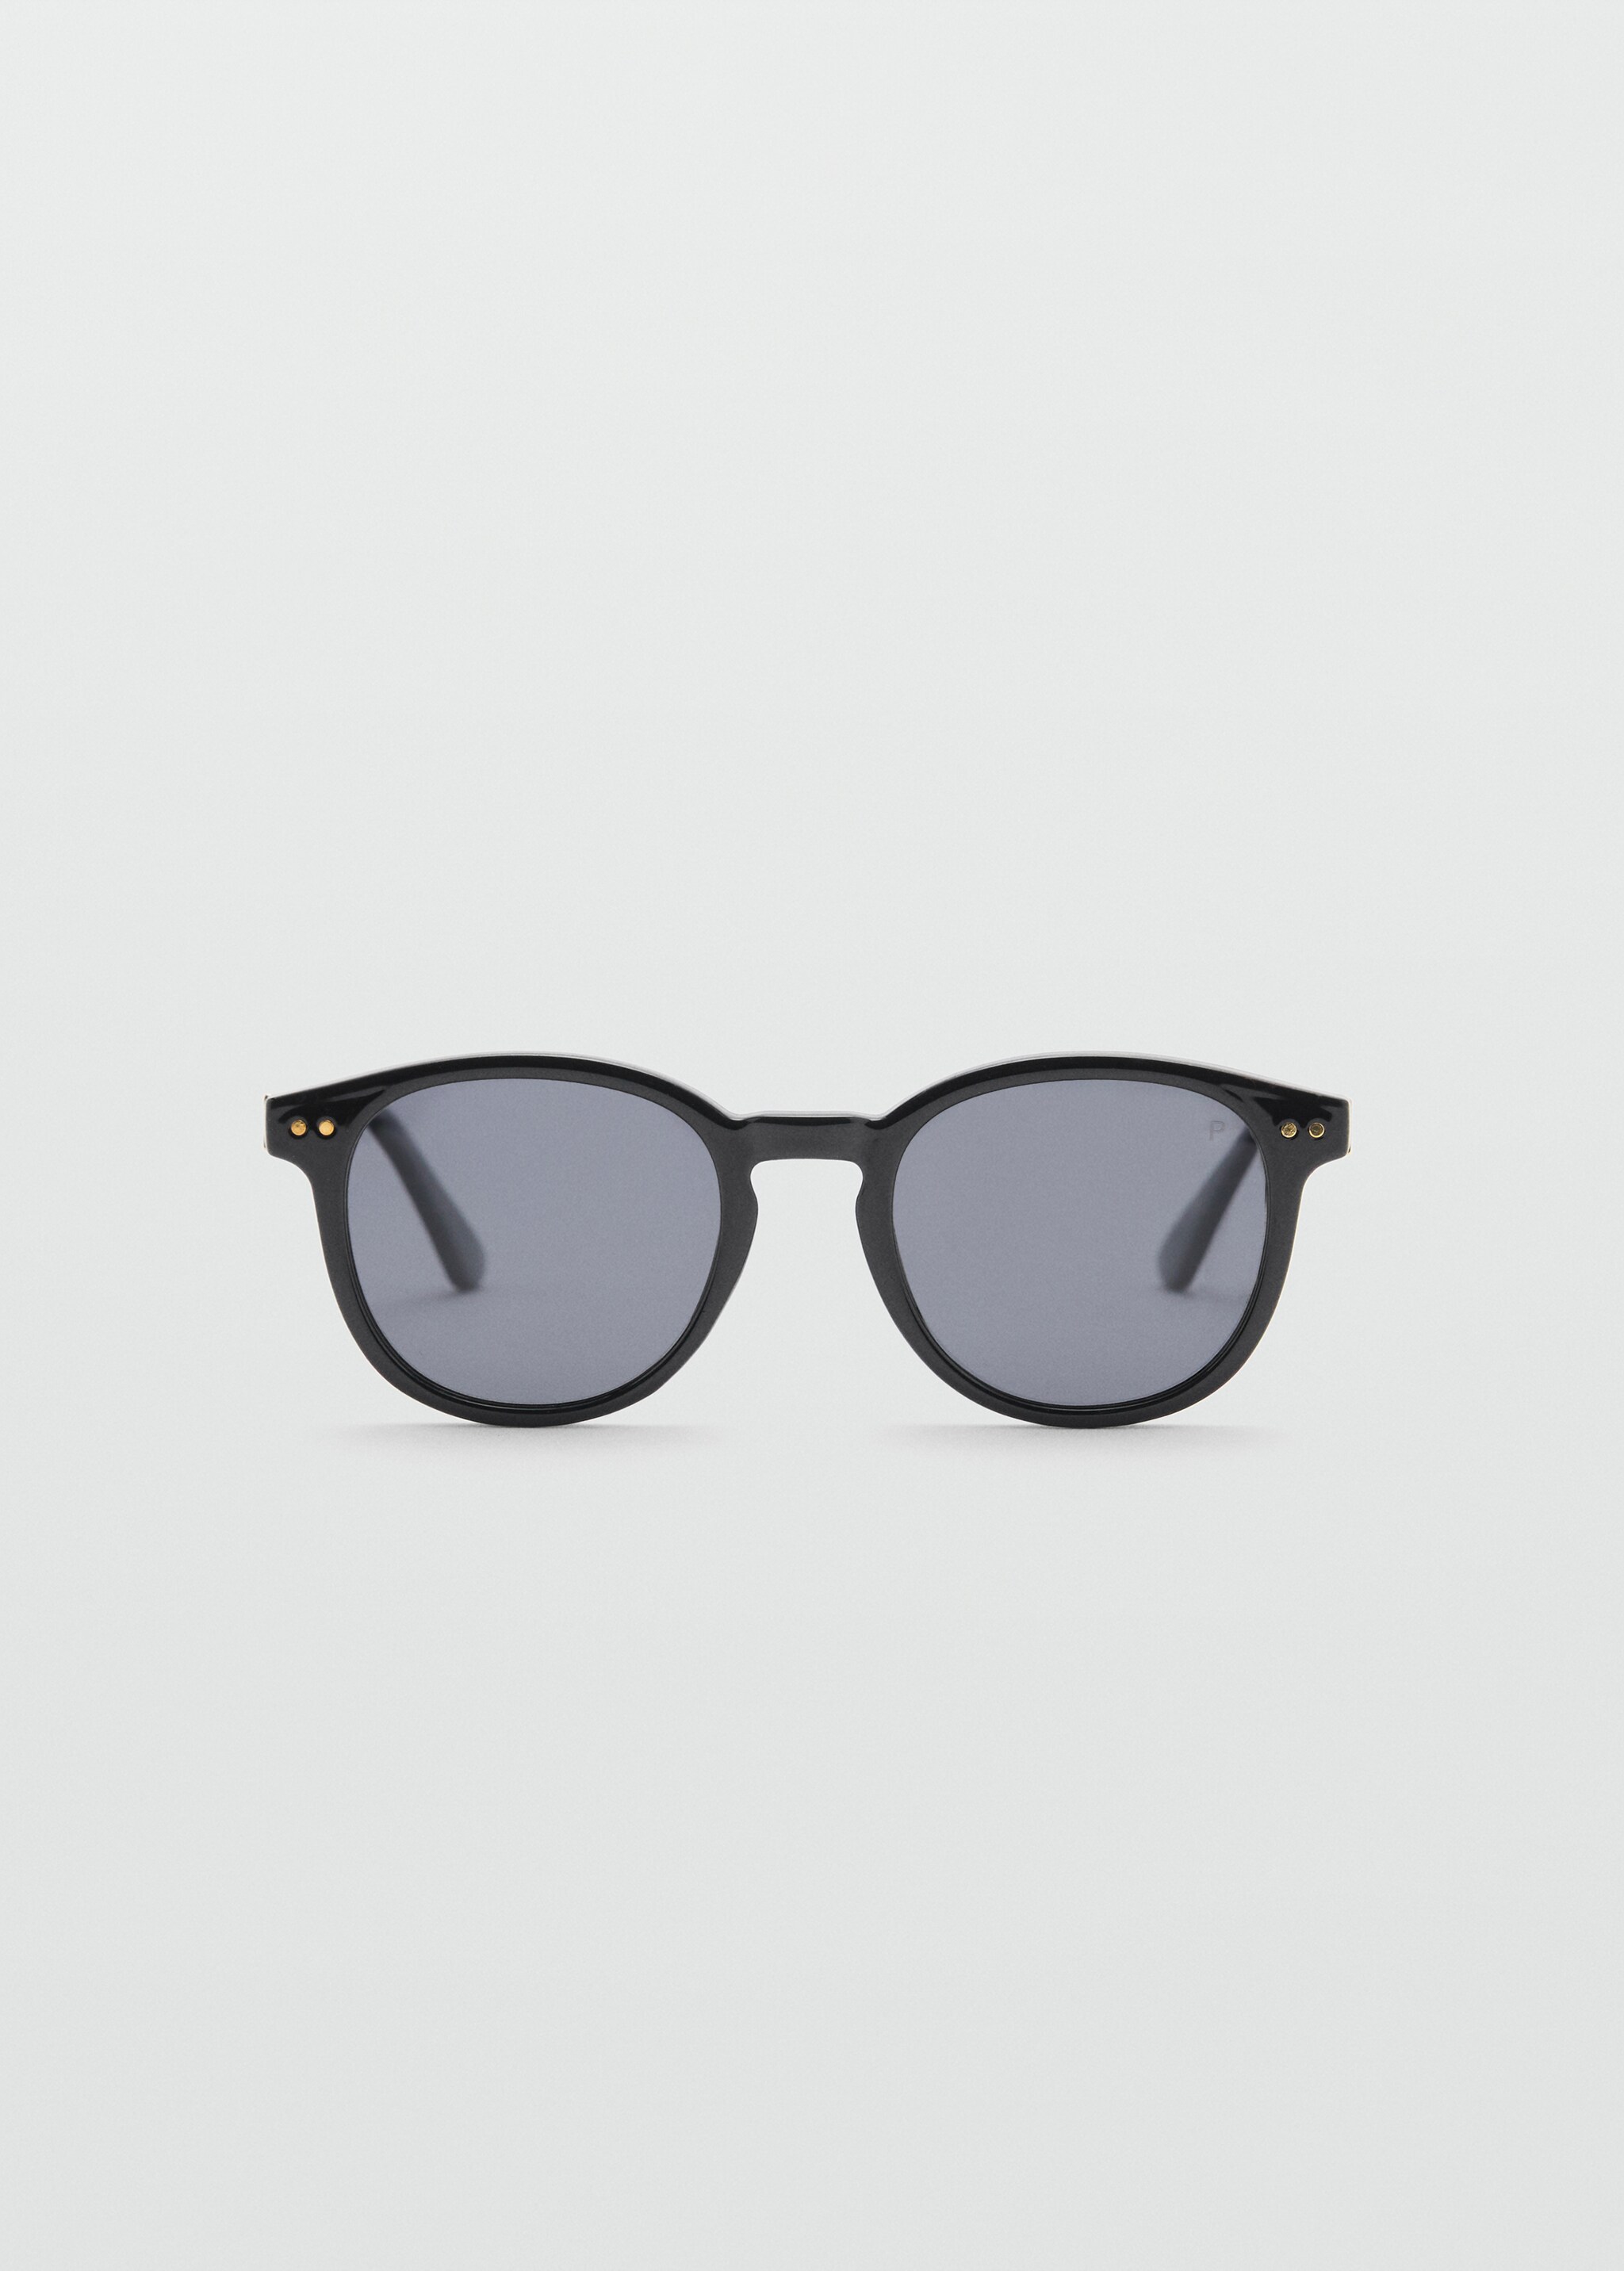 Sunglasses porter - Article without model